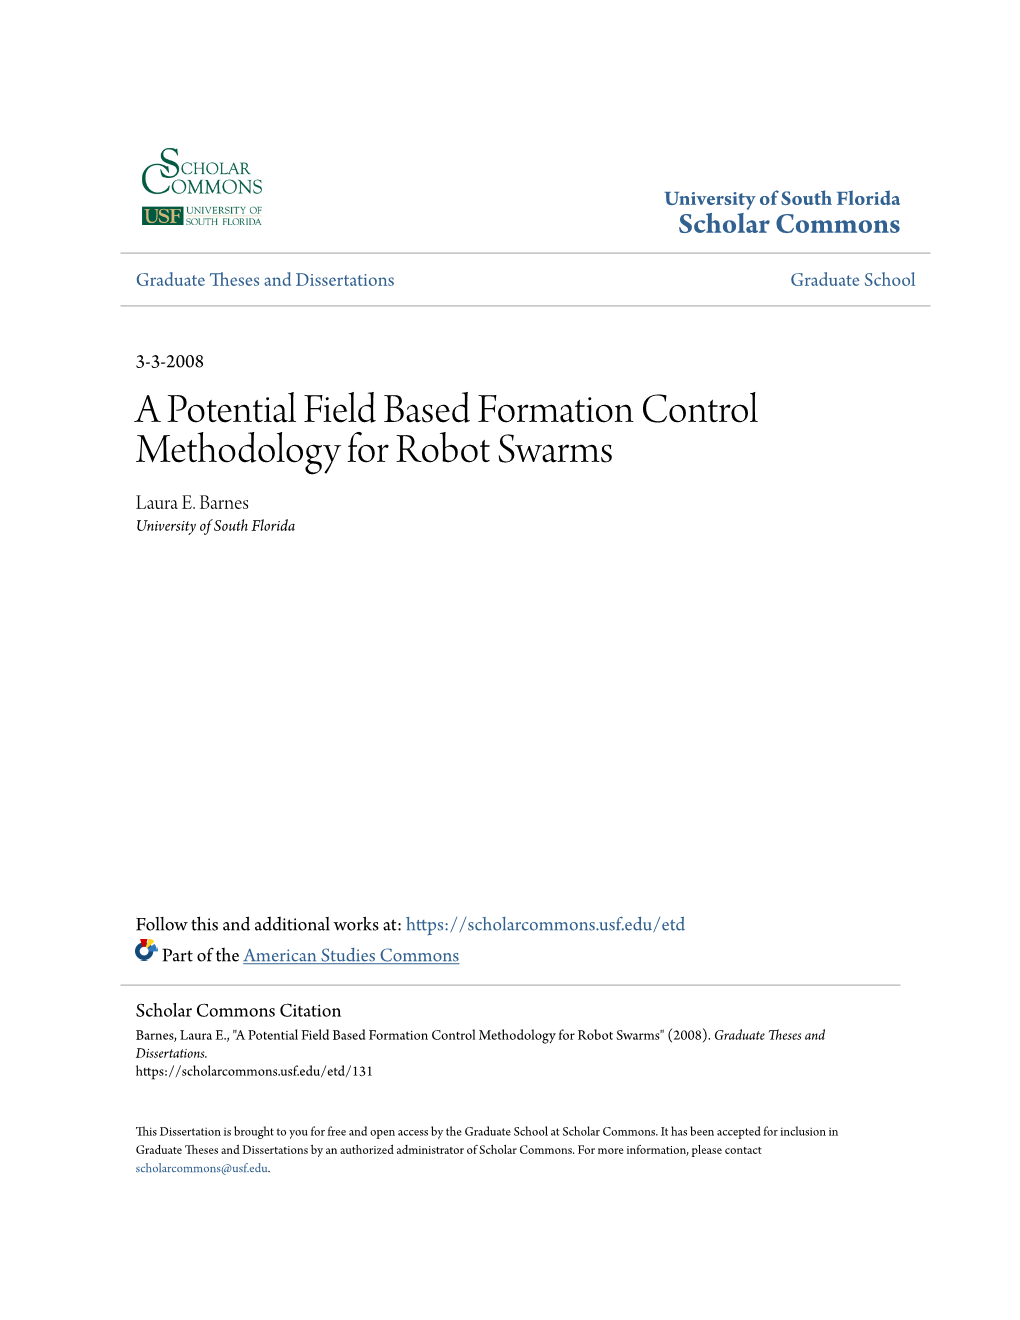 A Potential Field Based Formation Control Methodology for Robot Swarms Laura E